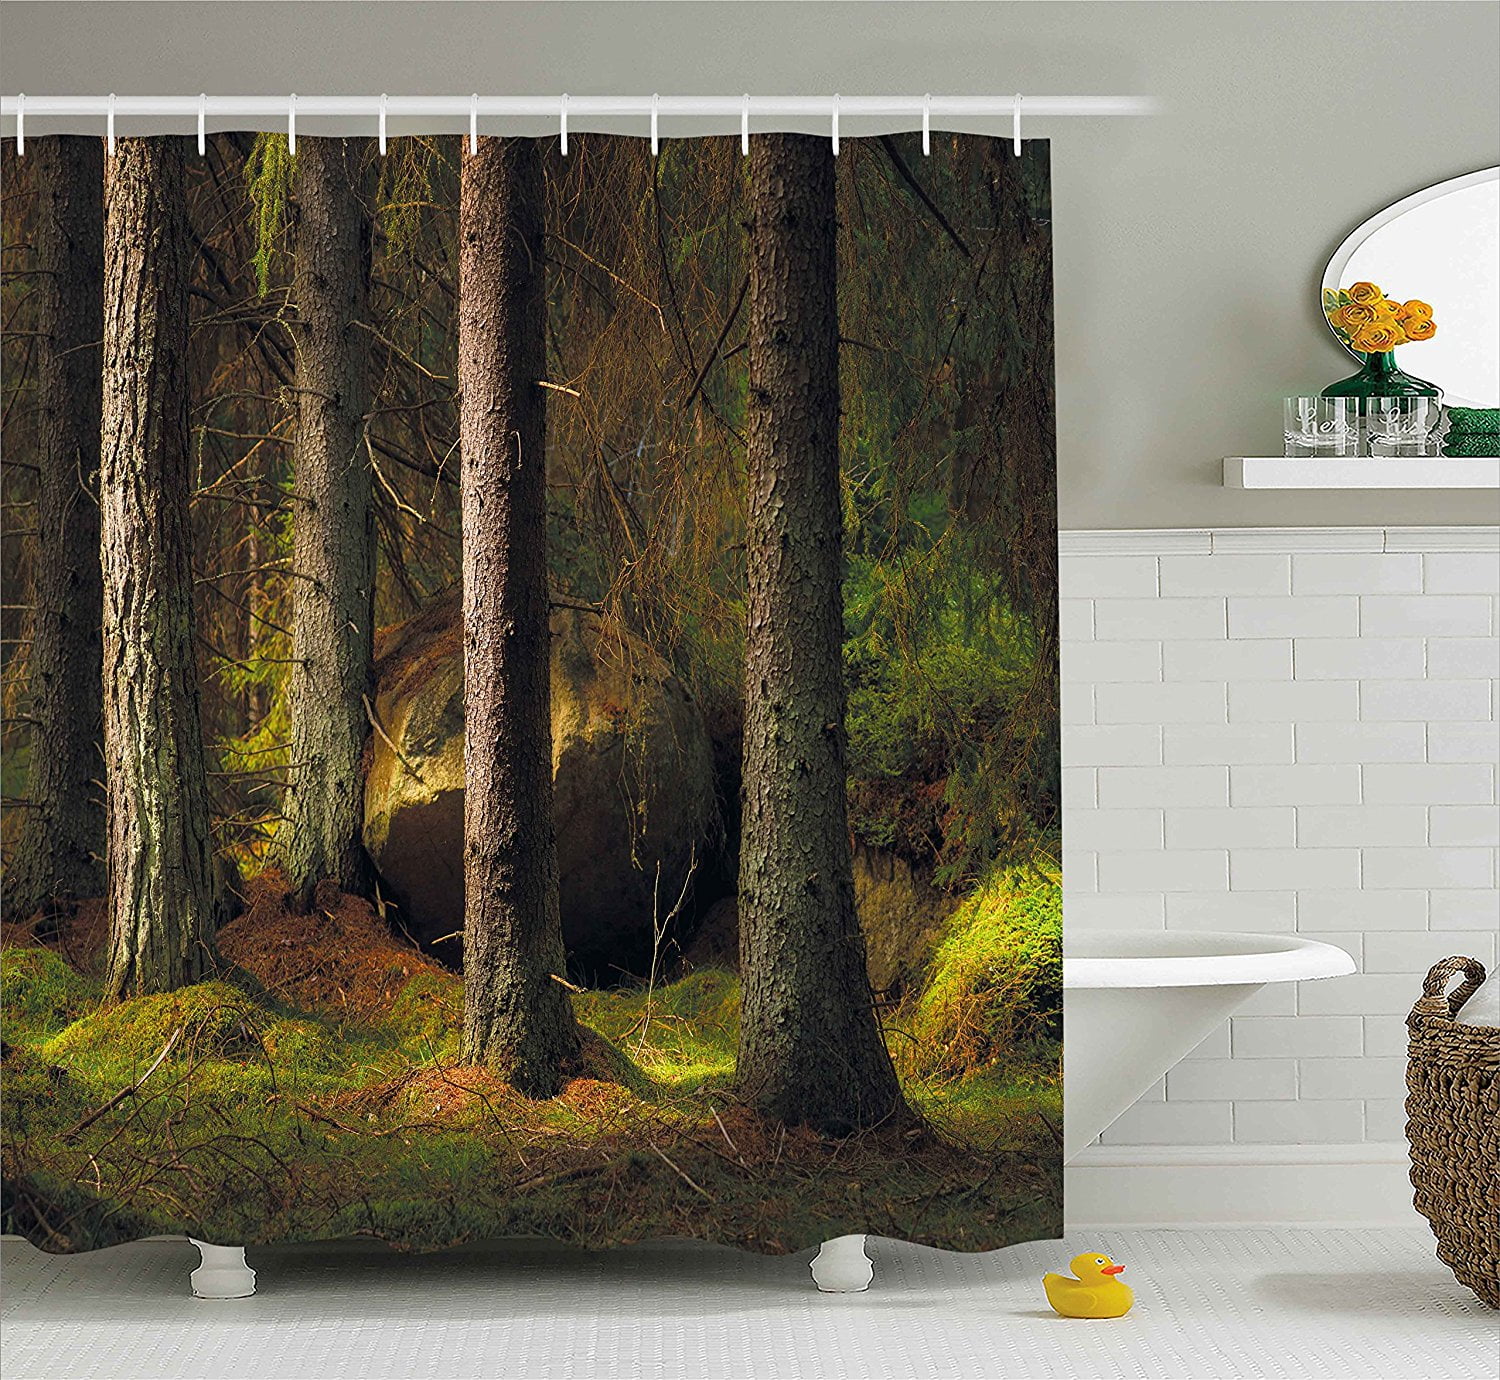 Ambesonne Magic Home Decor Collection Green Brown Polyester Fabric Bathroom Shower Curtain Set with Hooks Deep Dark in the Enchanted Forest with Magical Trees in Evening Light Mystical Theme